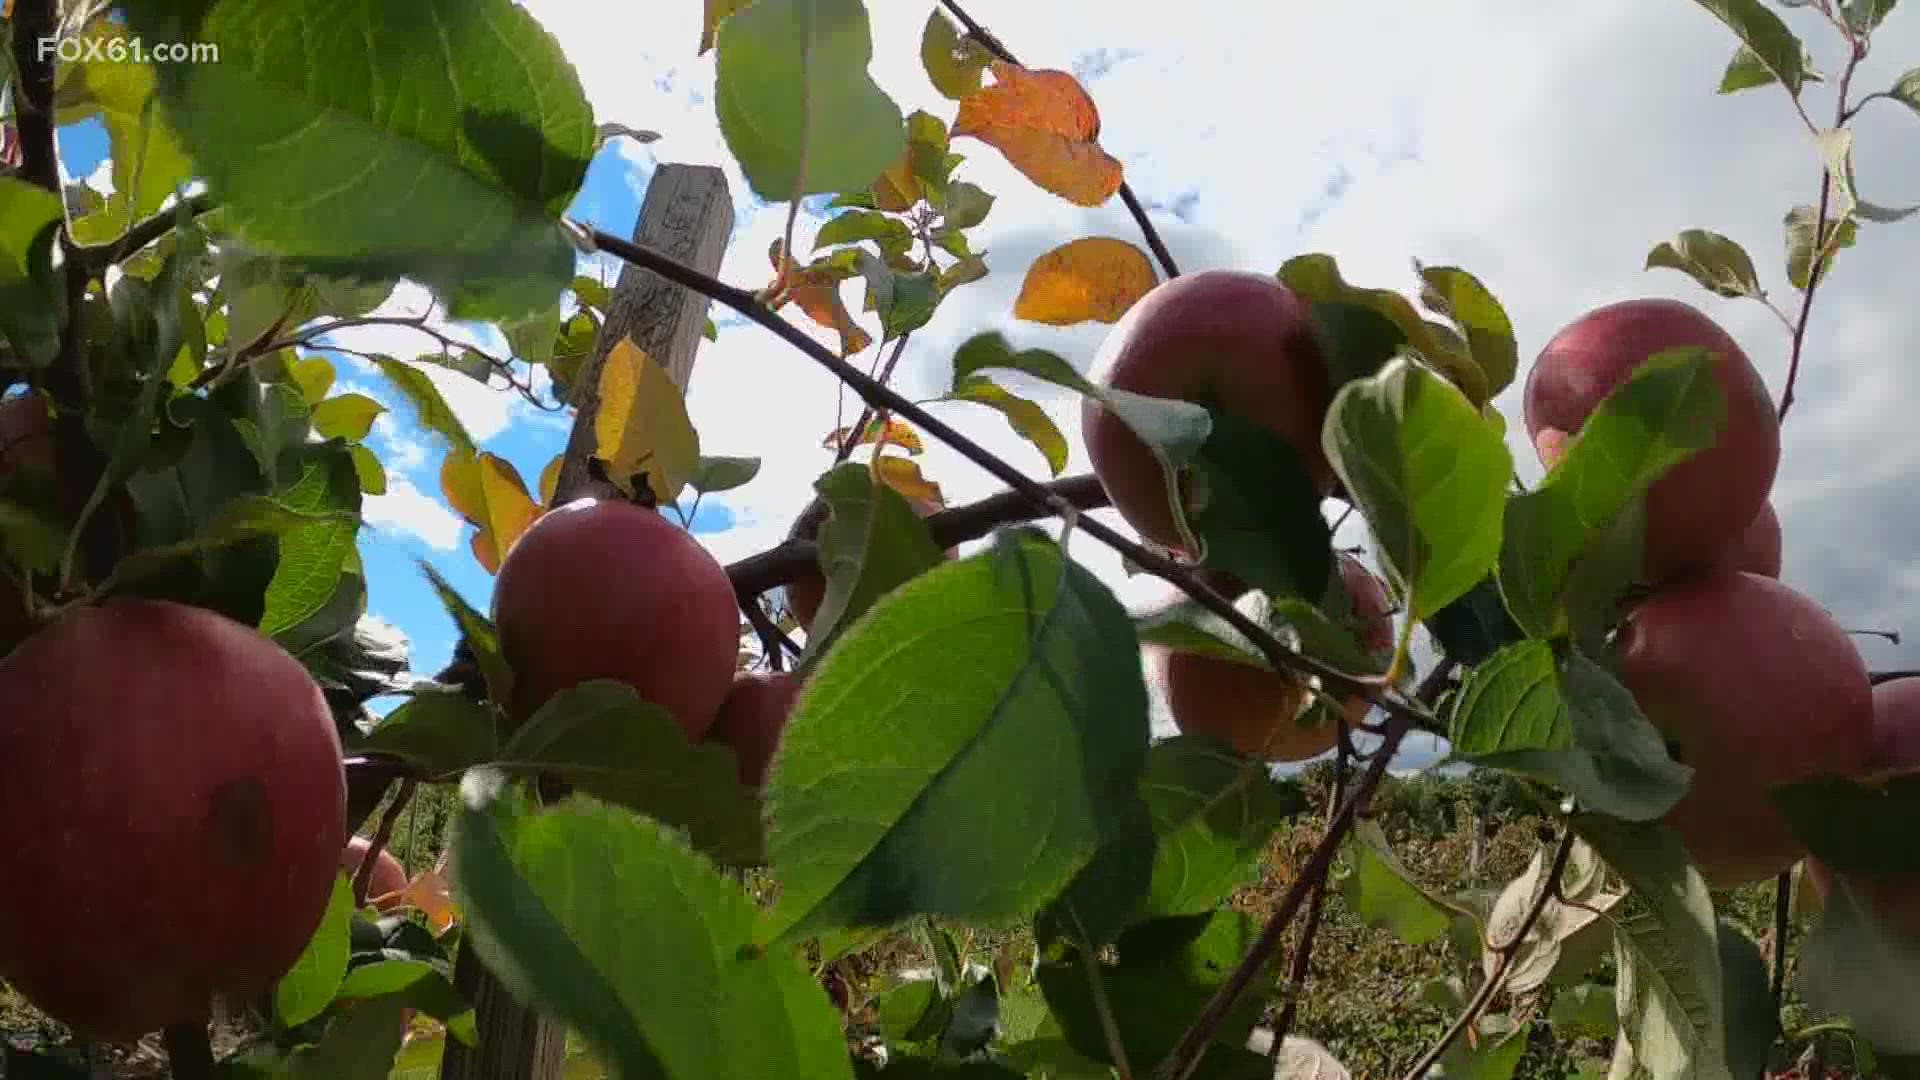 The summer's numerous storms have made for an excellent apple crop this year and pick-your-own is picking up steam.